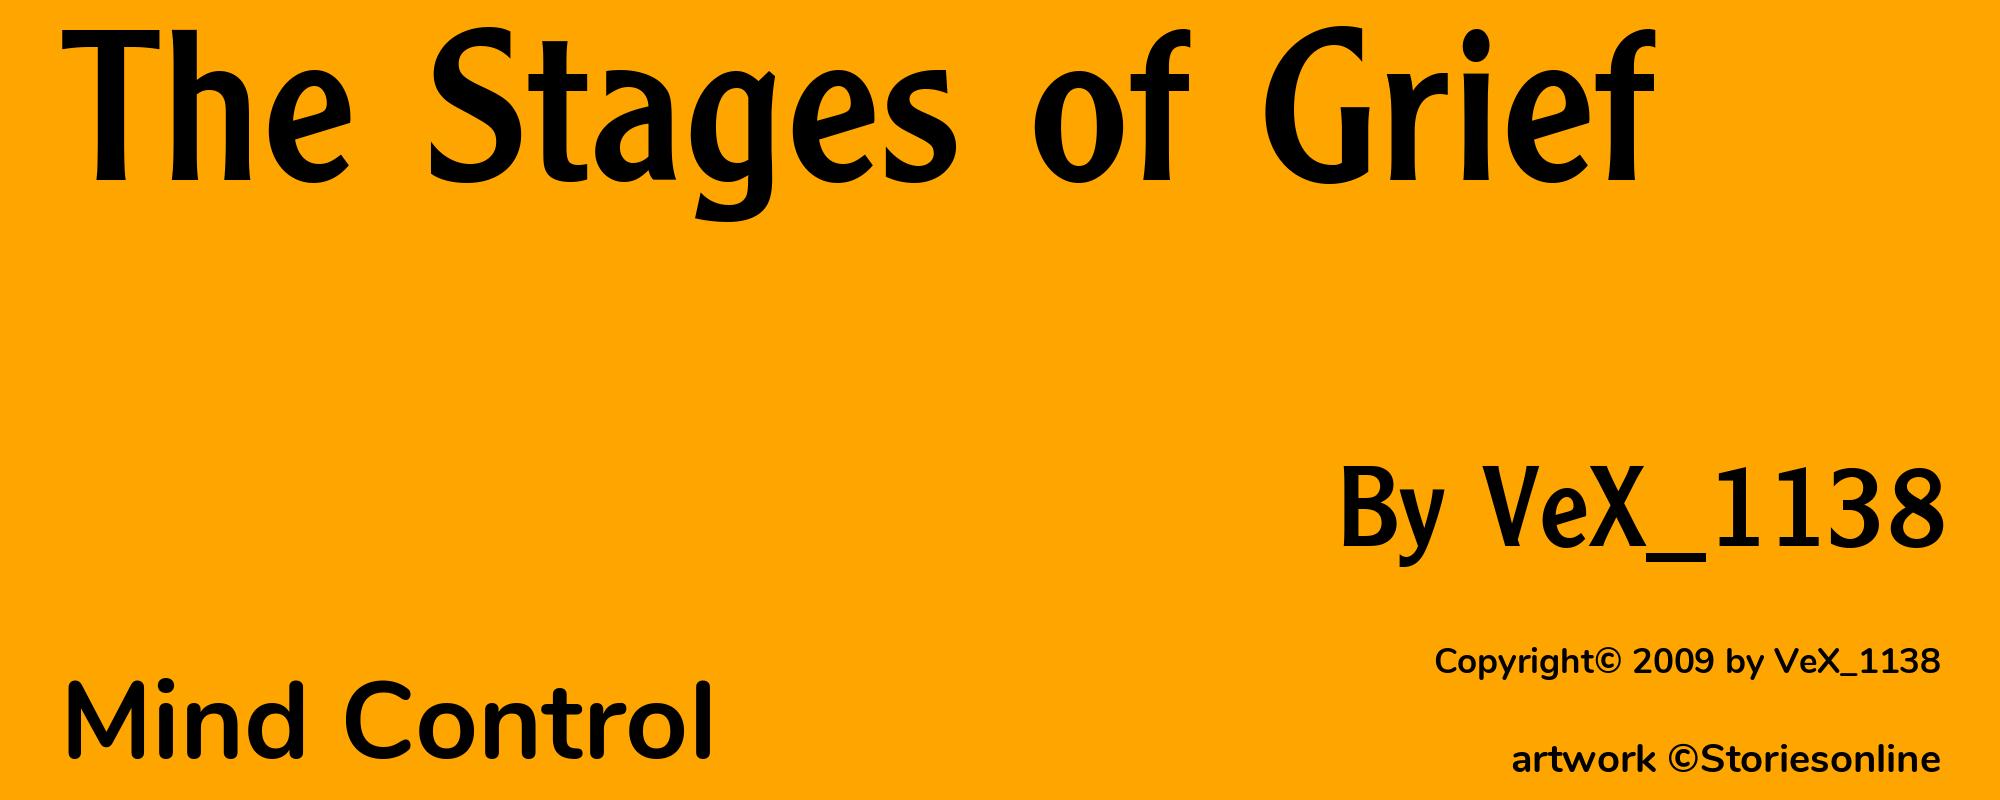 The Stages of Grief - Cover